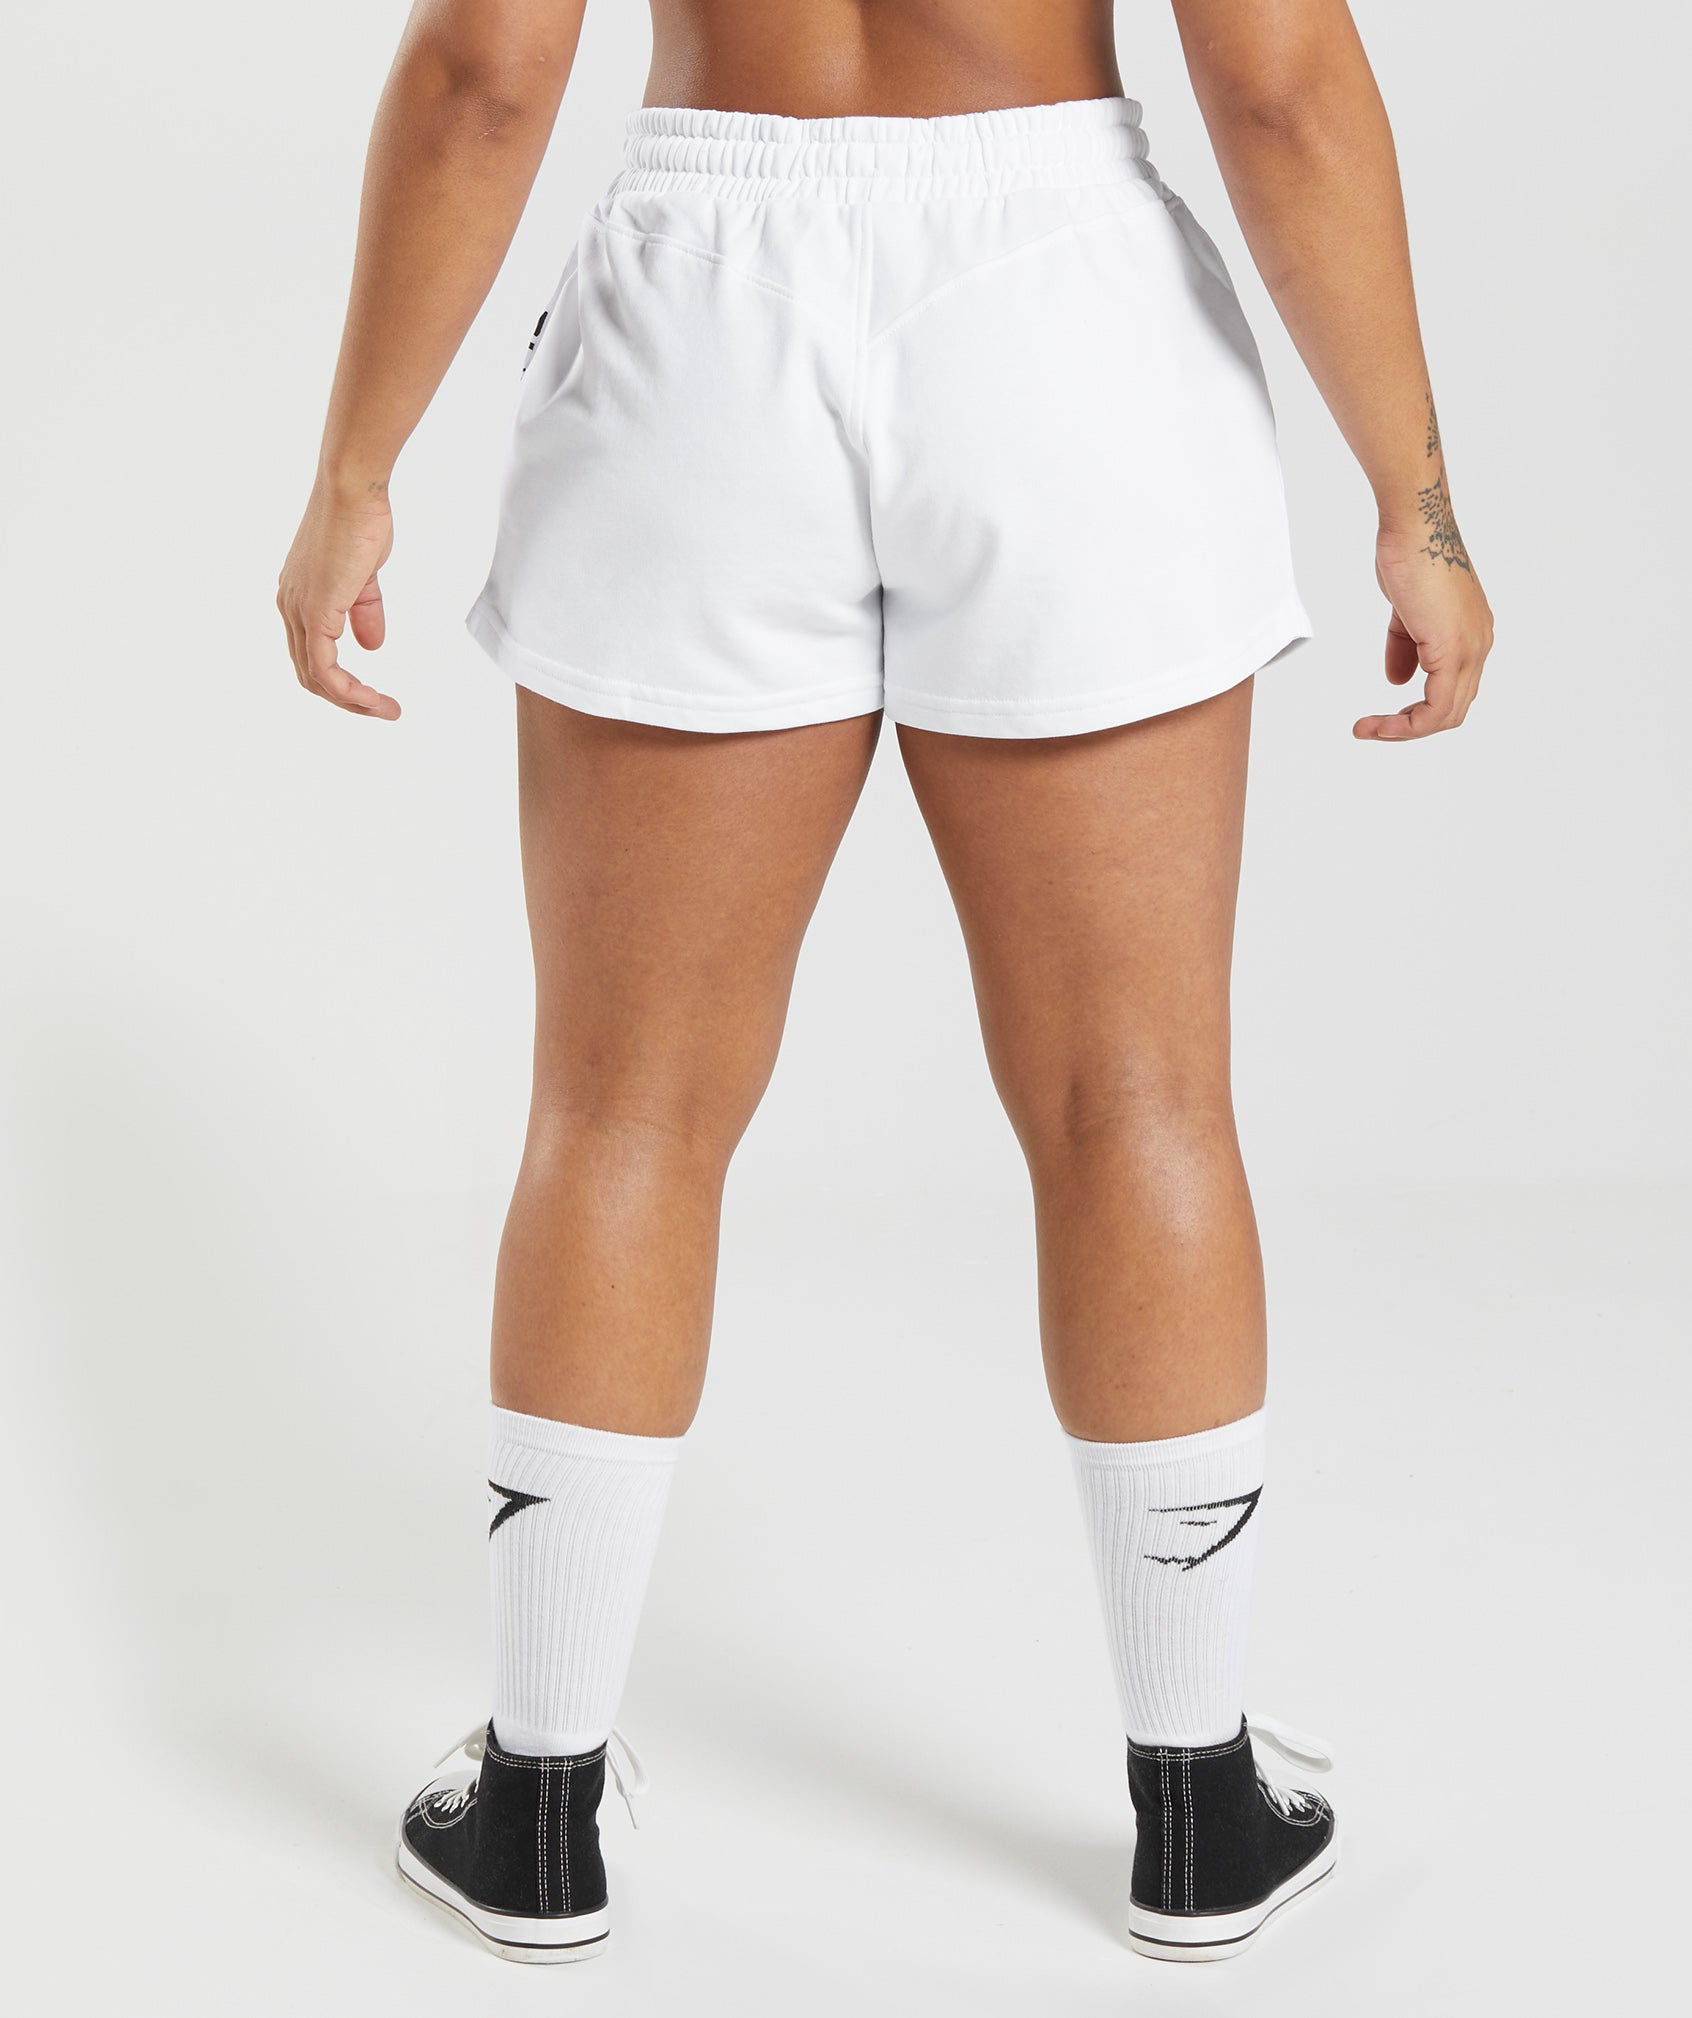 Legacy Shorts in White - view 2